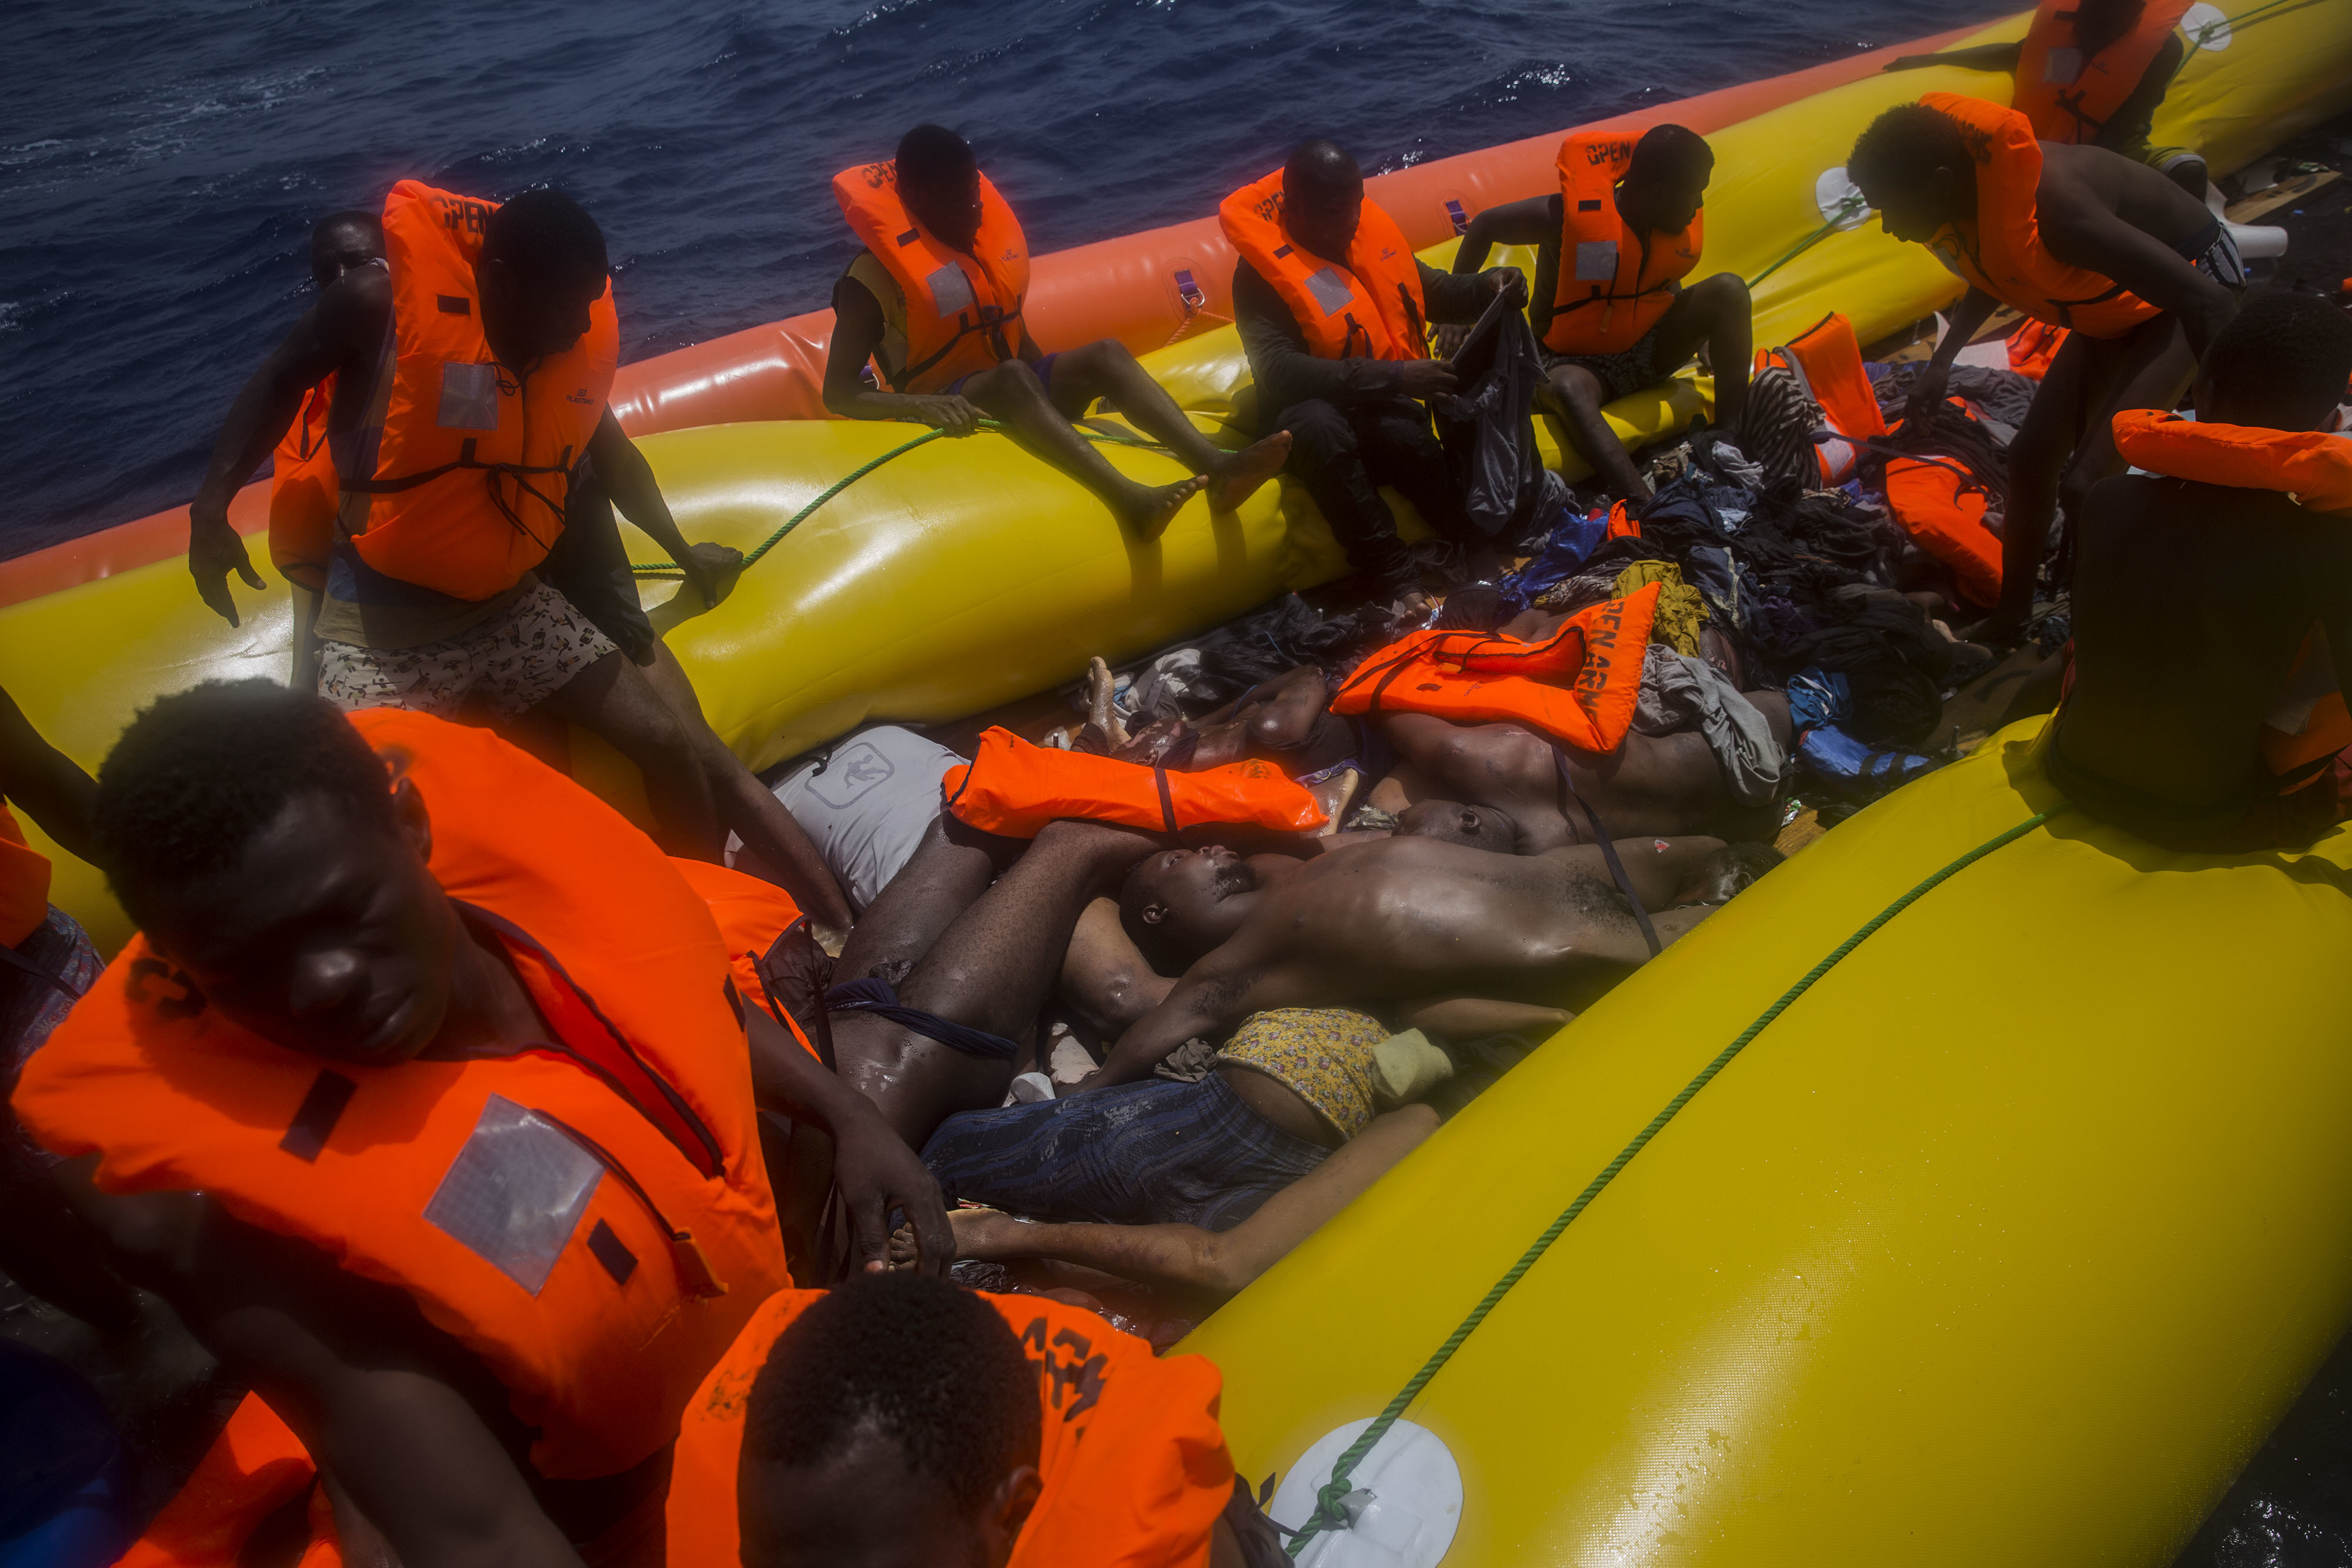 EDS NOTE: GRAPHIC CONTENT - Migrants wait to be rescued by aid workers of Spanish NGO Proactiva Open Arms next to dead bodies of other migrants in the Mediterranean Sea, about 15 miles north of Sabratha, Libya on Tuesday, July 25, 2017. (AP Photo/Santi Palacios)